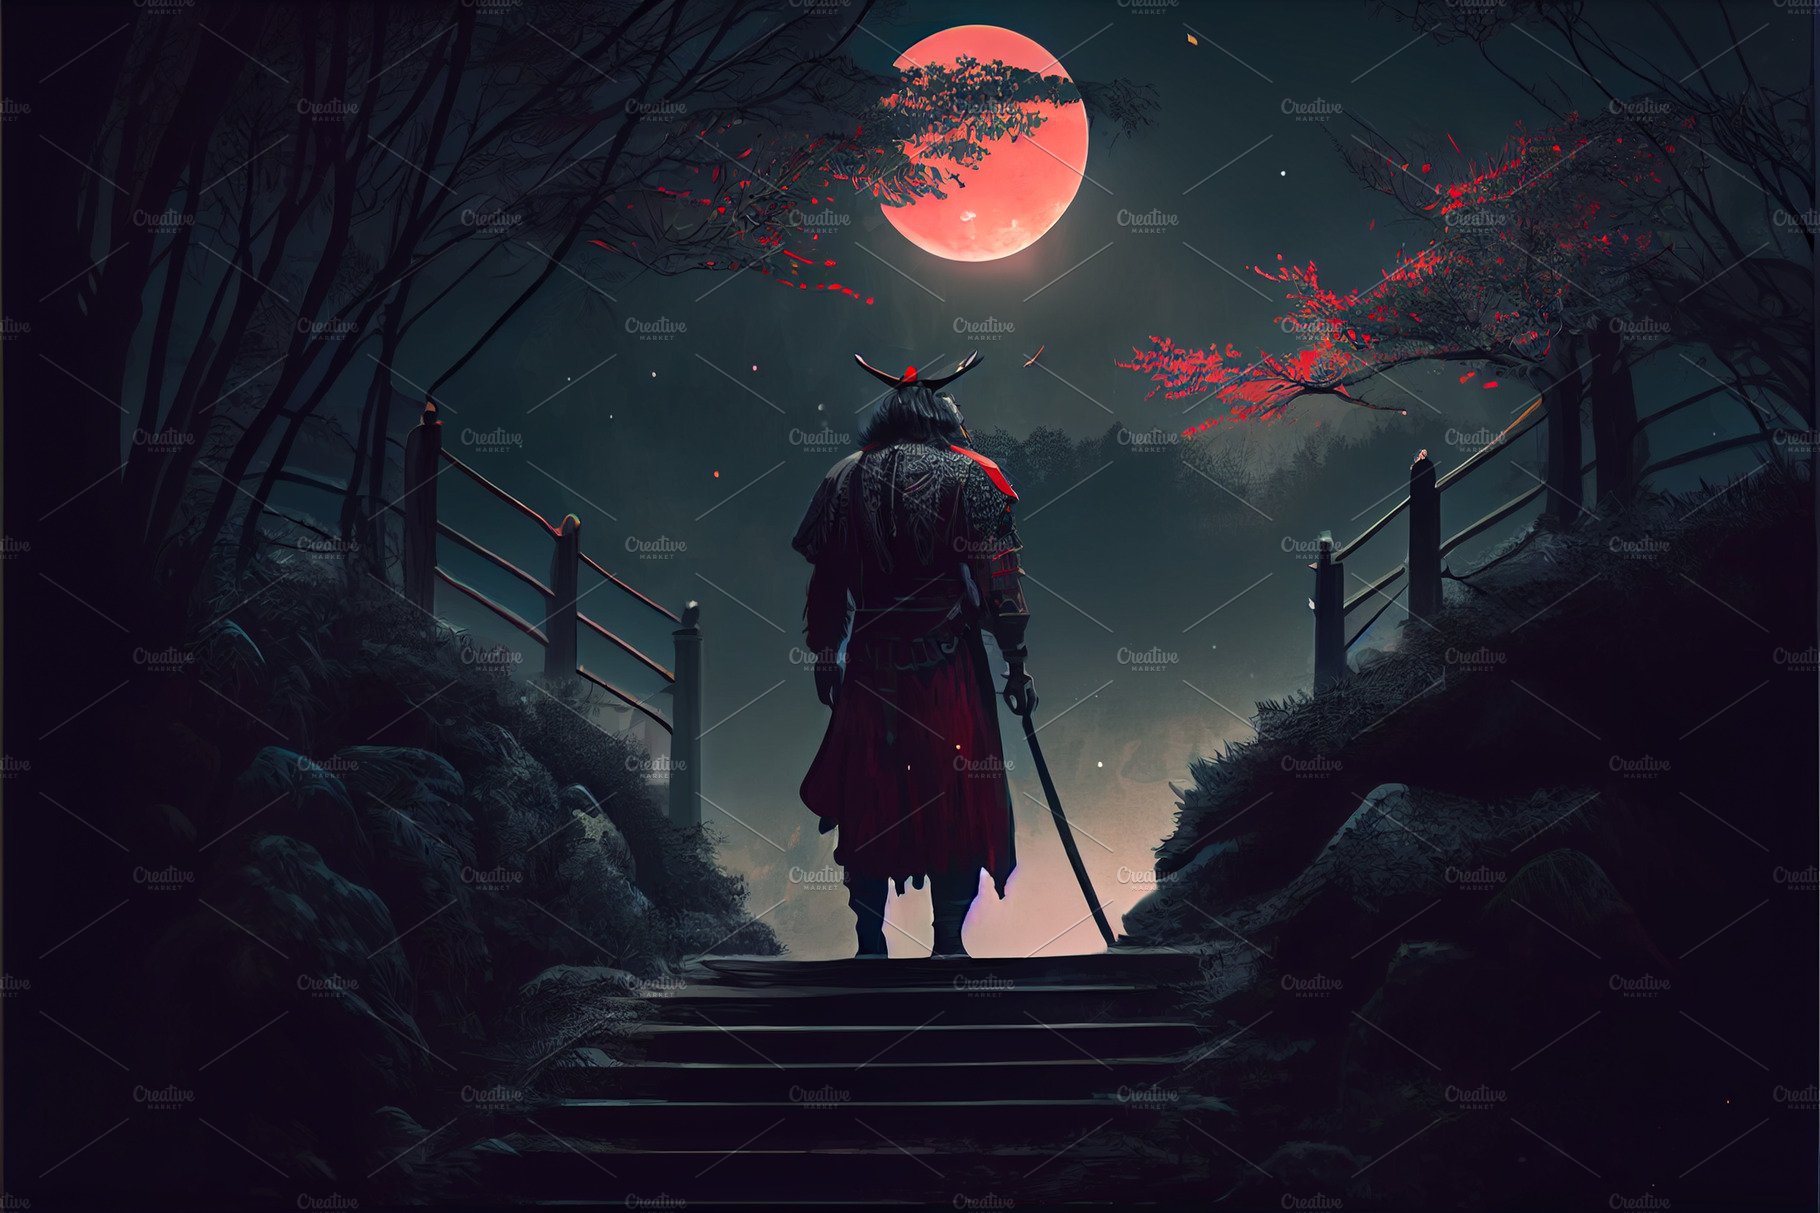 terrifying ronin stands in the forest at night cover image.